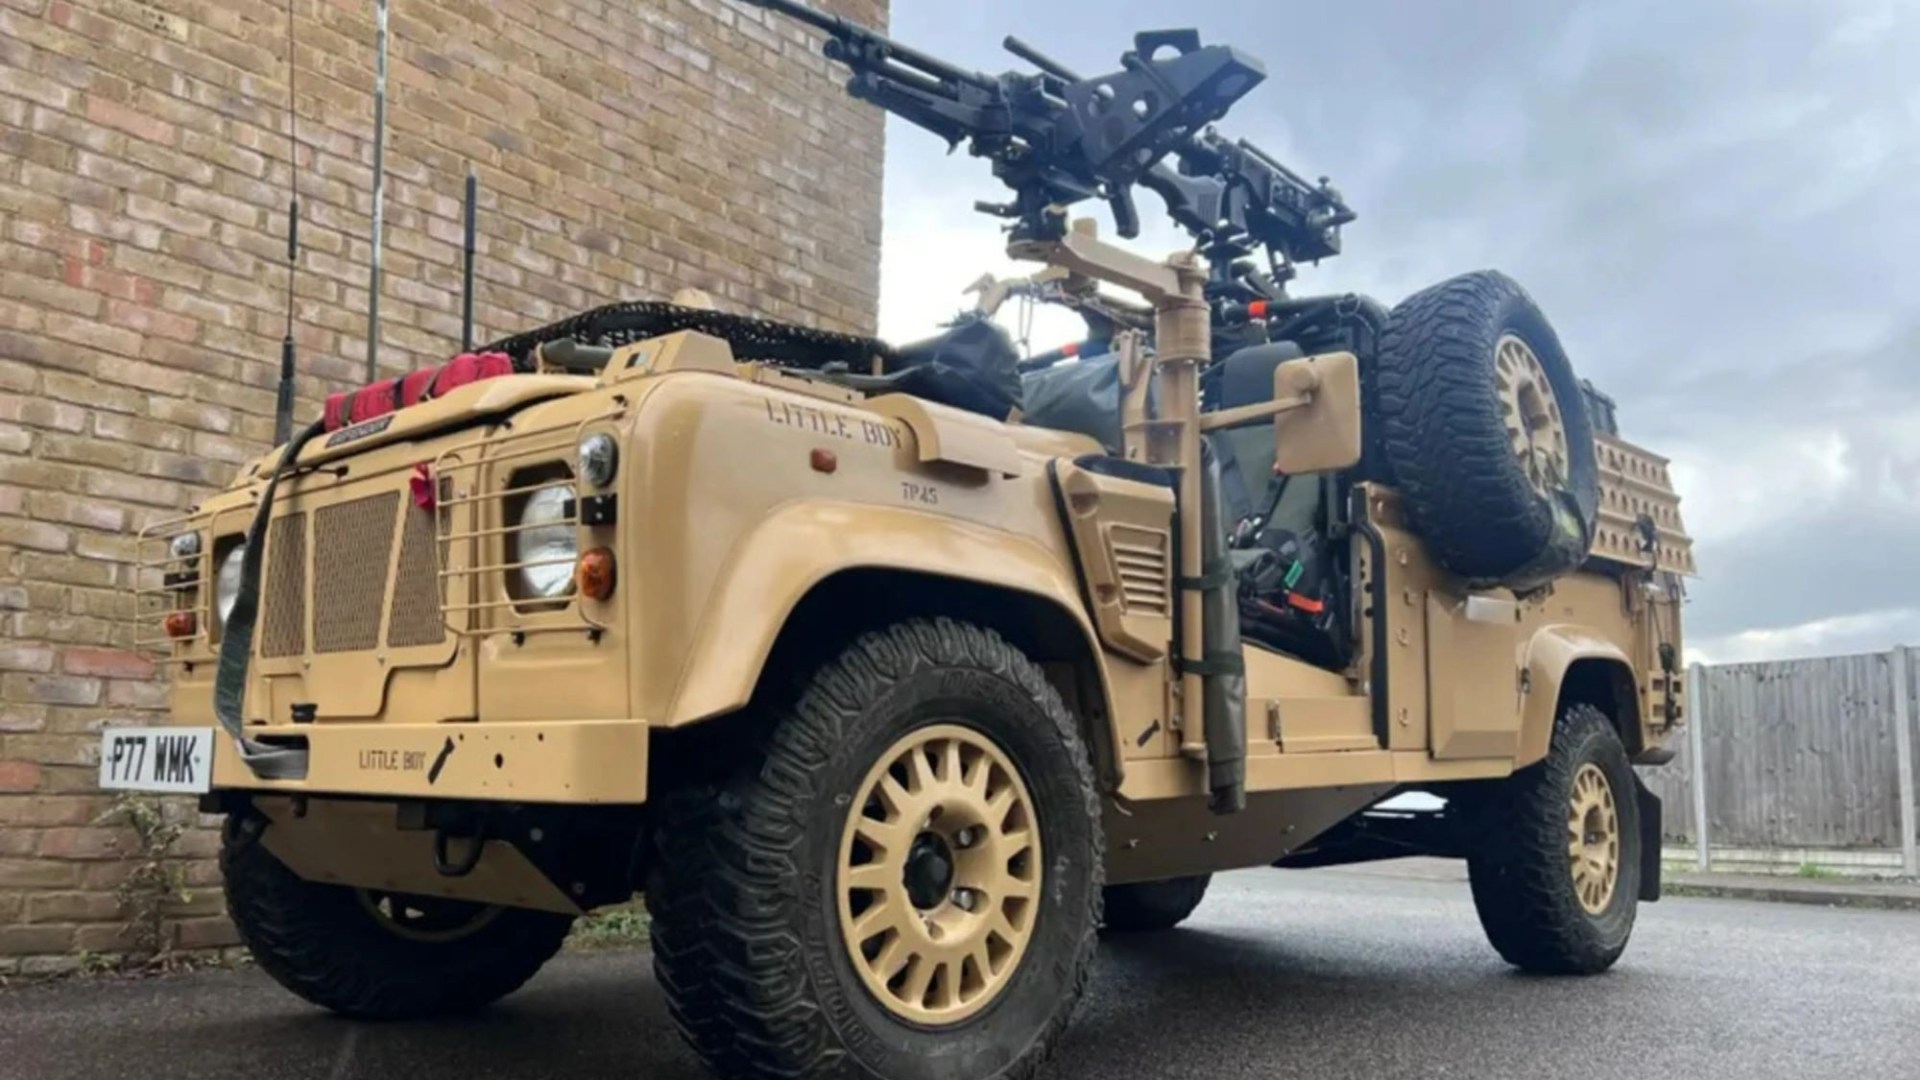 Army Land Rover that saw combat in the Middle East up for sale at same price as a Volvo – and comes with WEAPONS mount [Video]